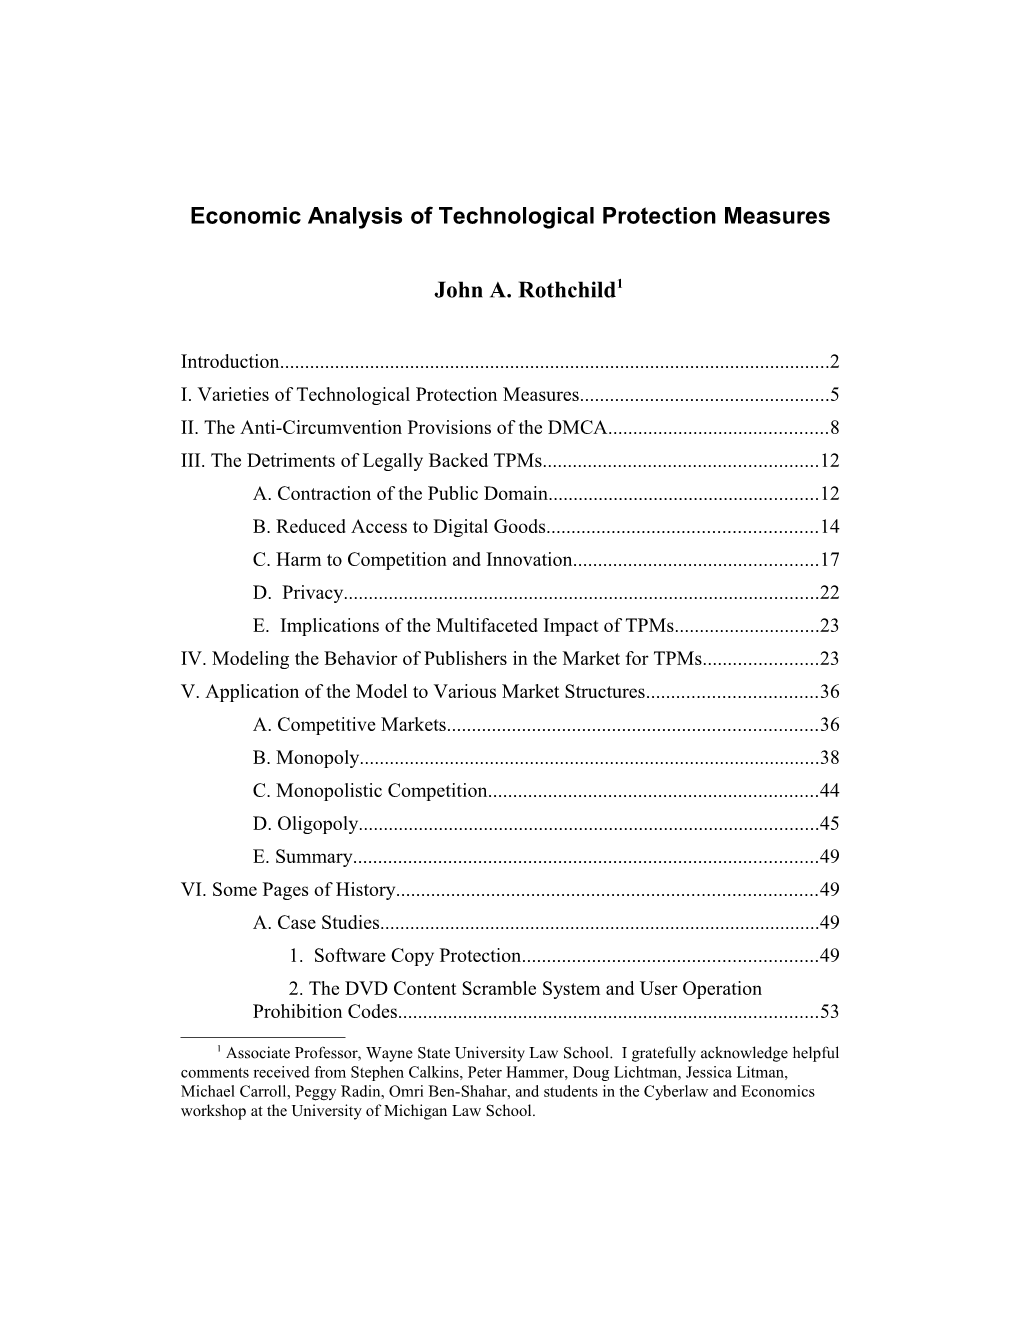 Economic Analysis of Technological Protection Measures